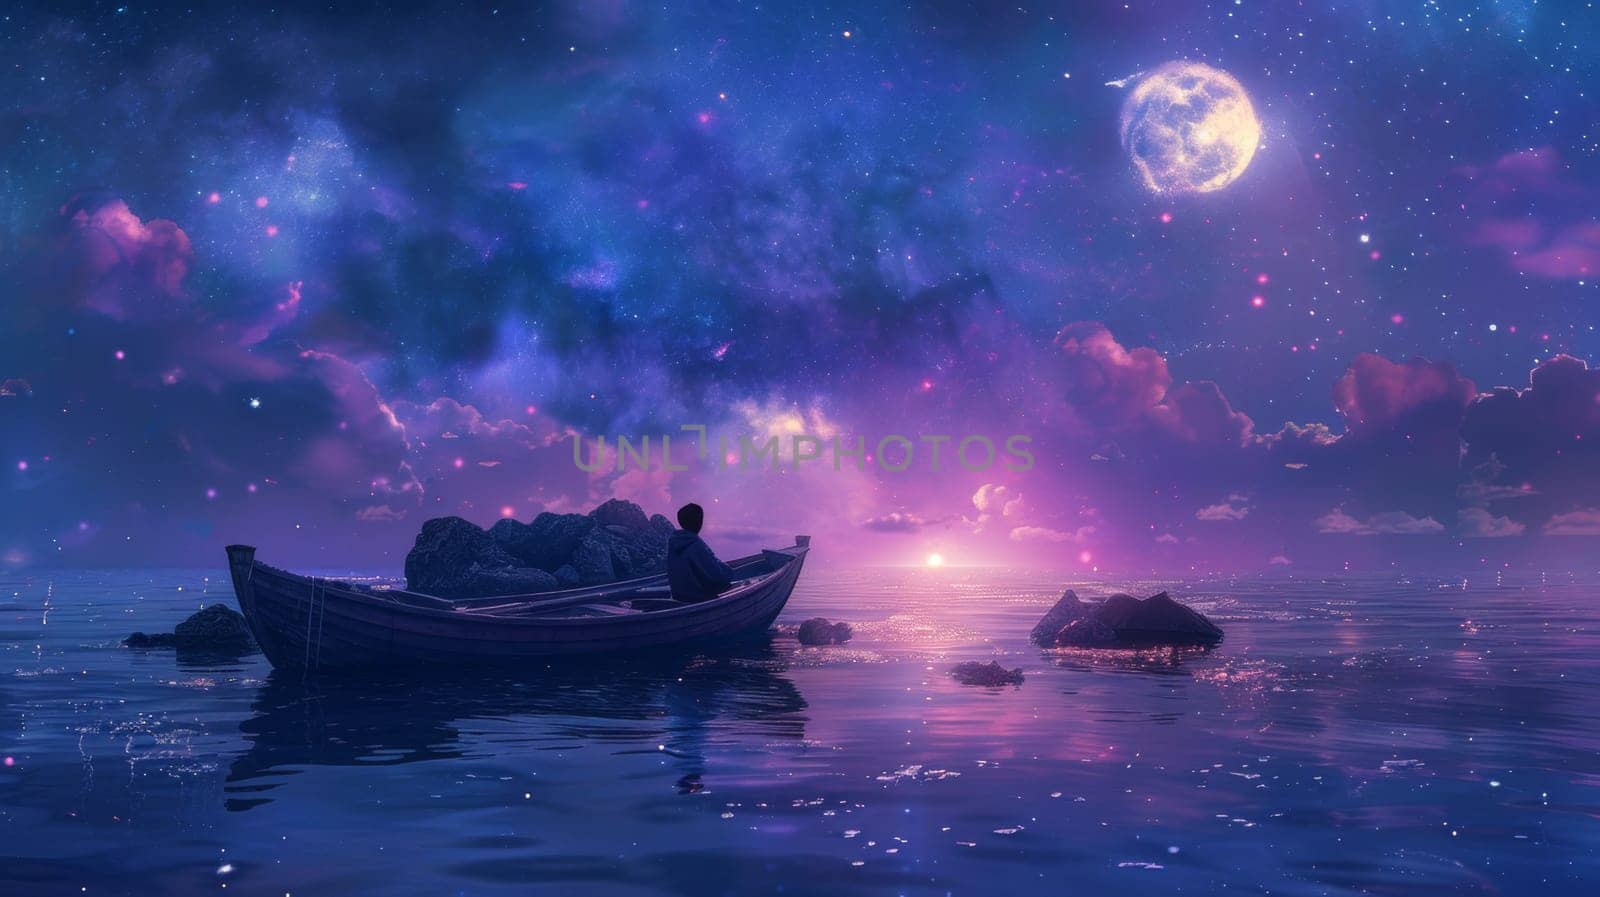 A man sitting in a boat on the water at night